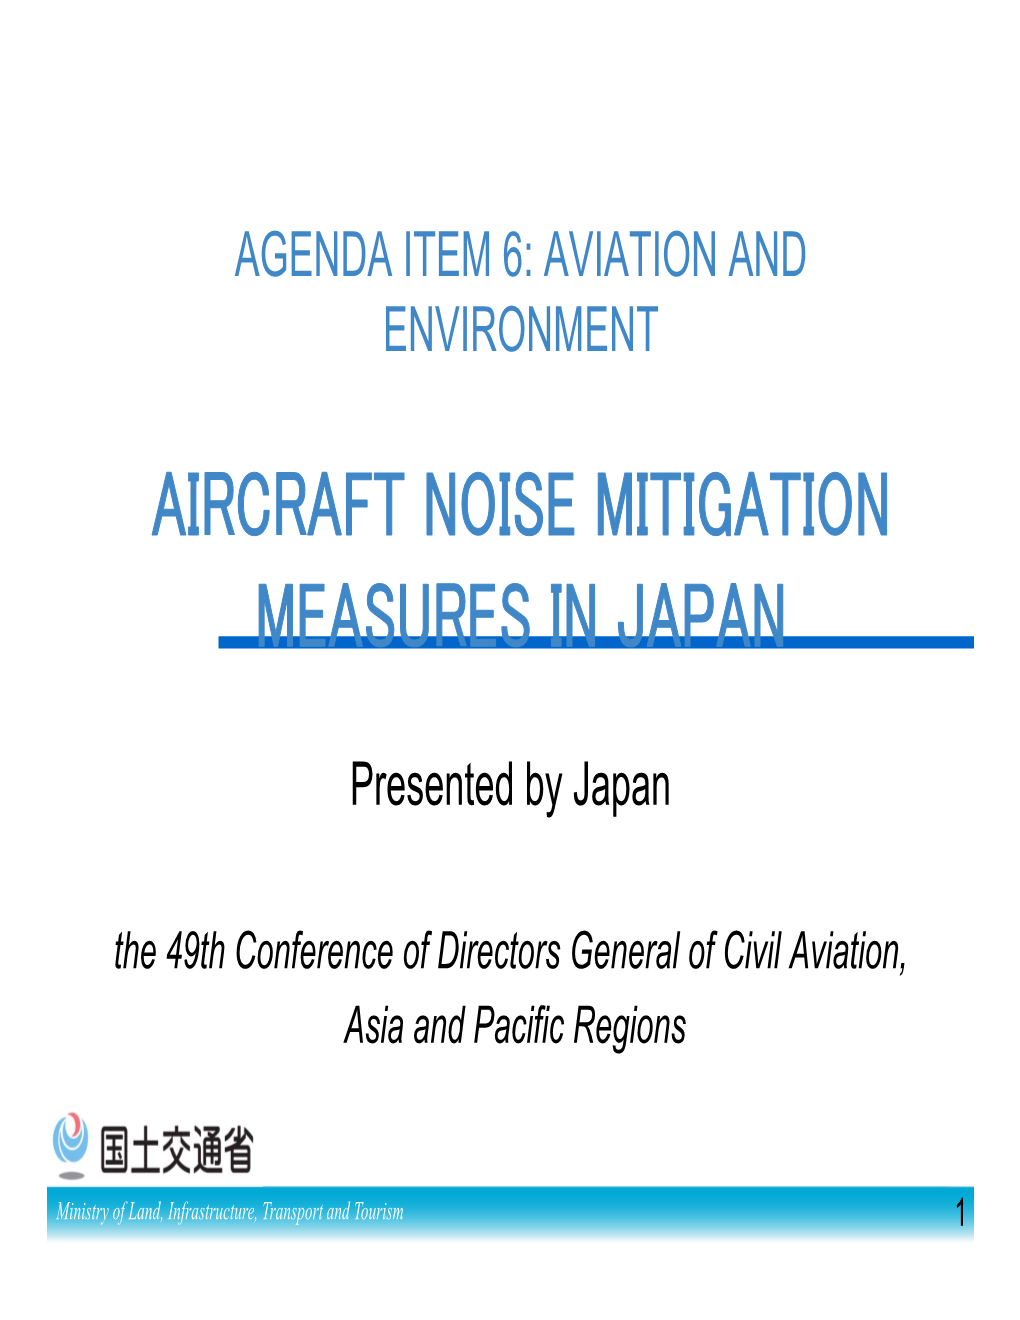 Aircraft Noise Mitigation Measures in Japan